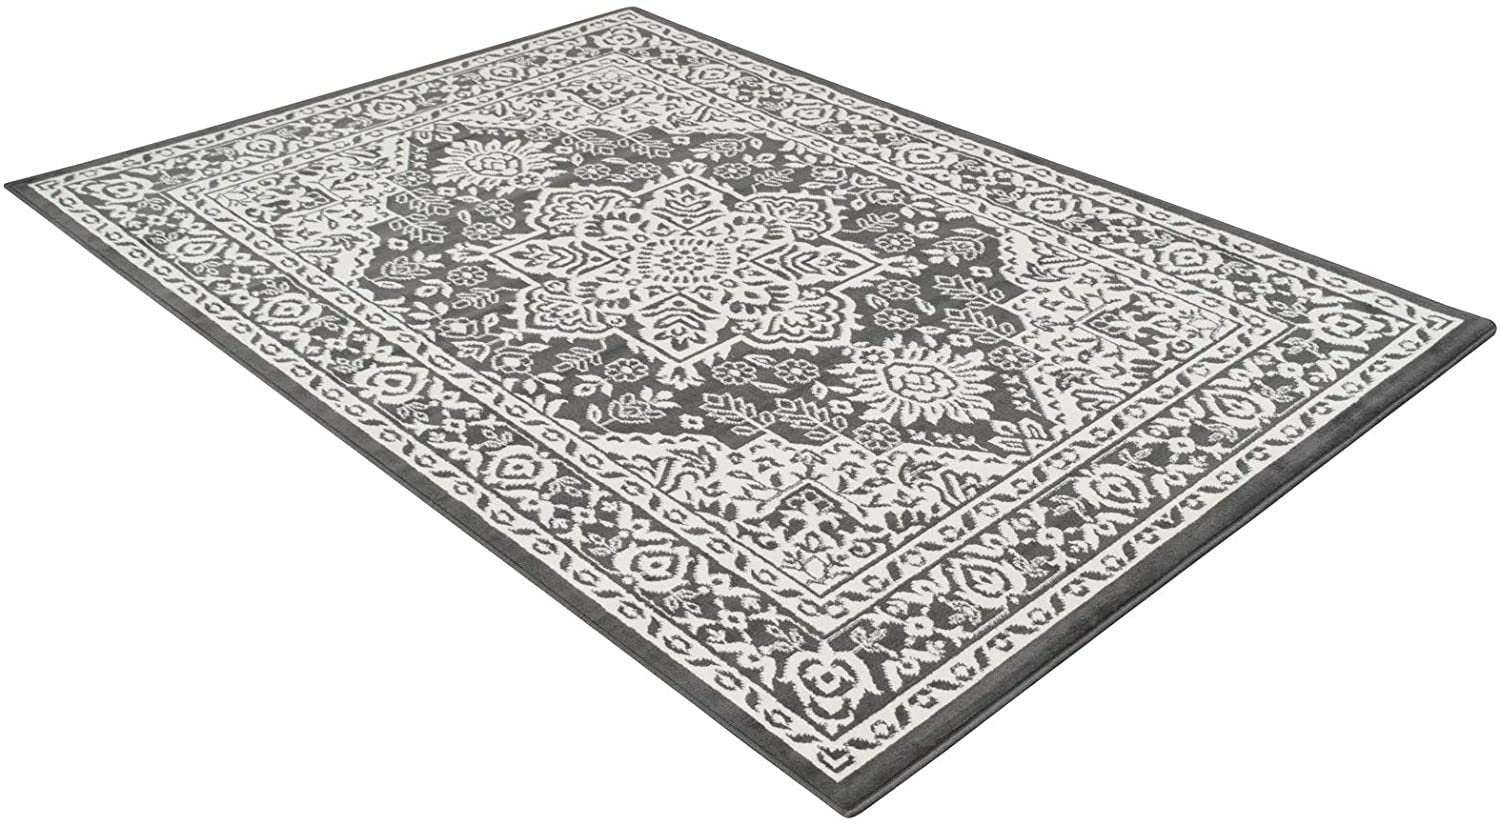 Traditional Rug for Living Room Antiqued Oriental Gray and White Area Rug Boho D????cor Rugs for Bedroom